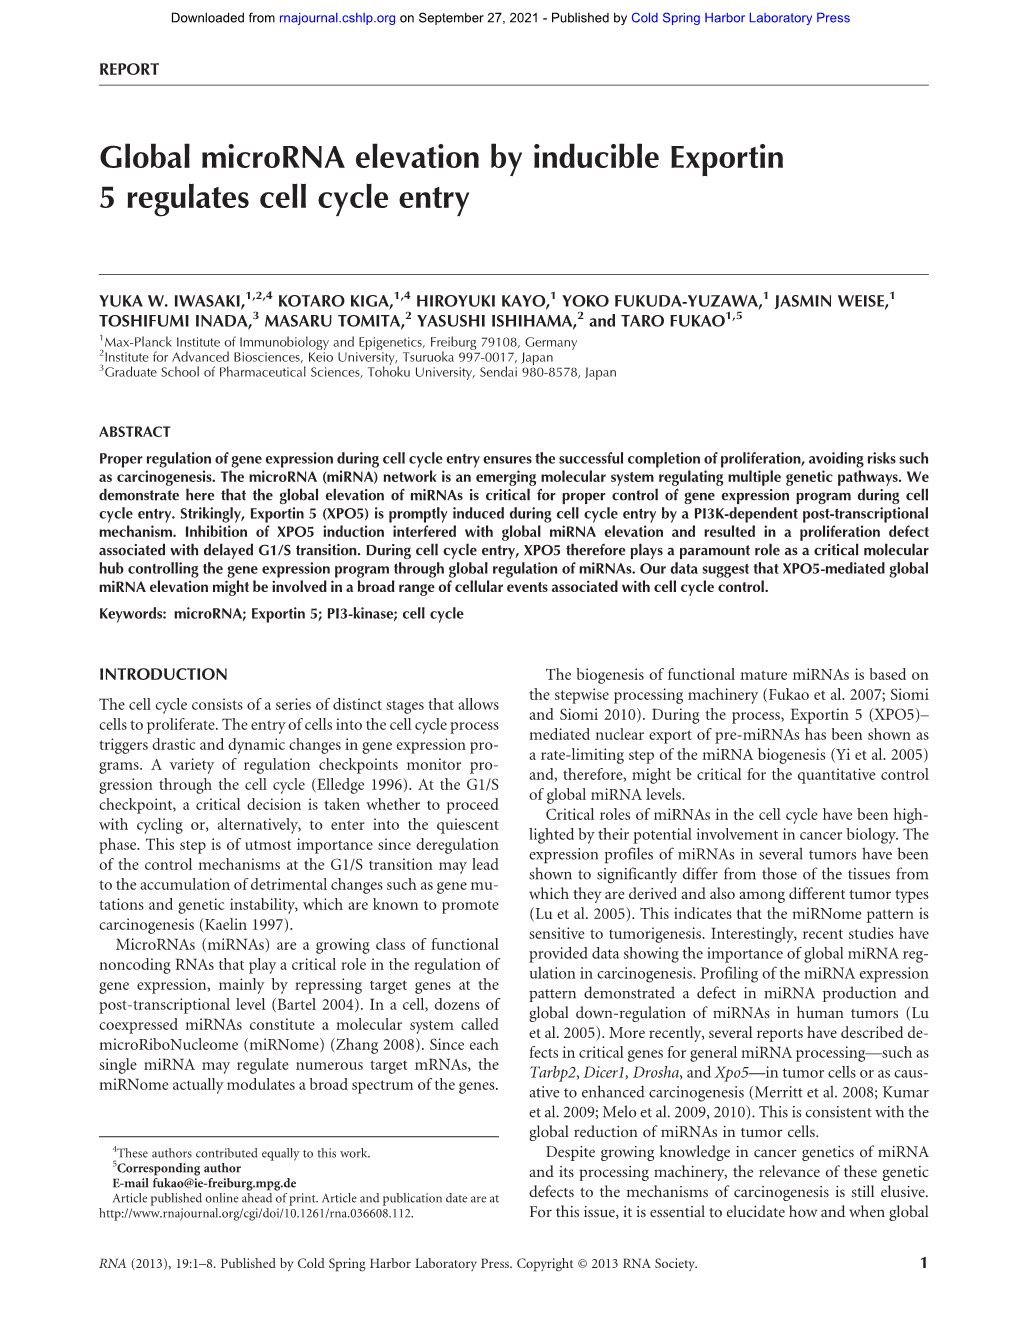 Global Microrna Elevation by Inducible Exportin 5 Regulates Cell Cycle Entry